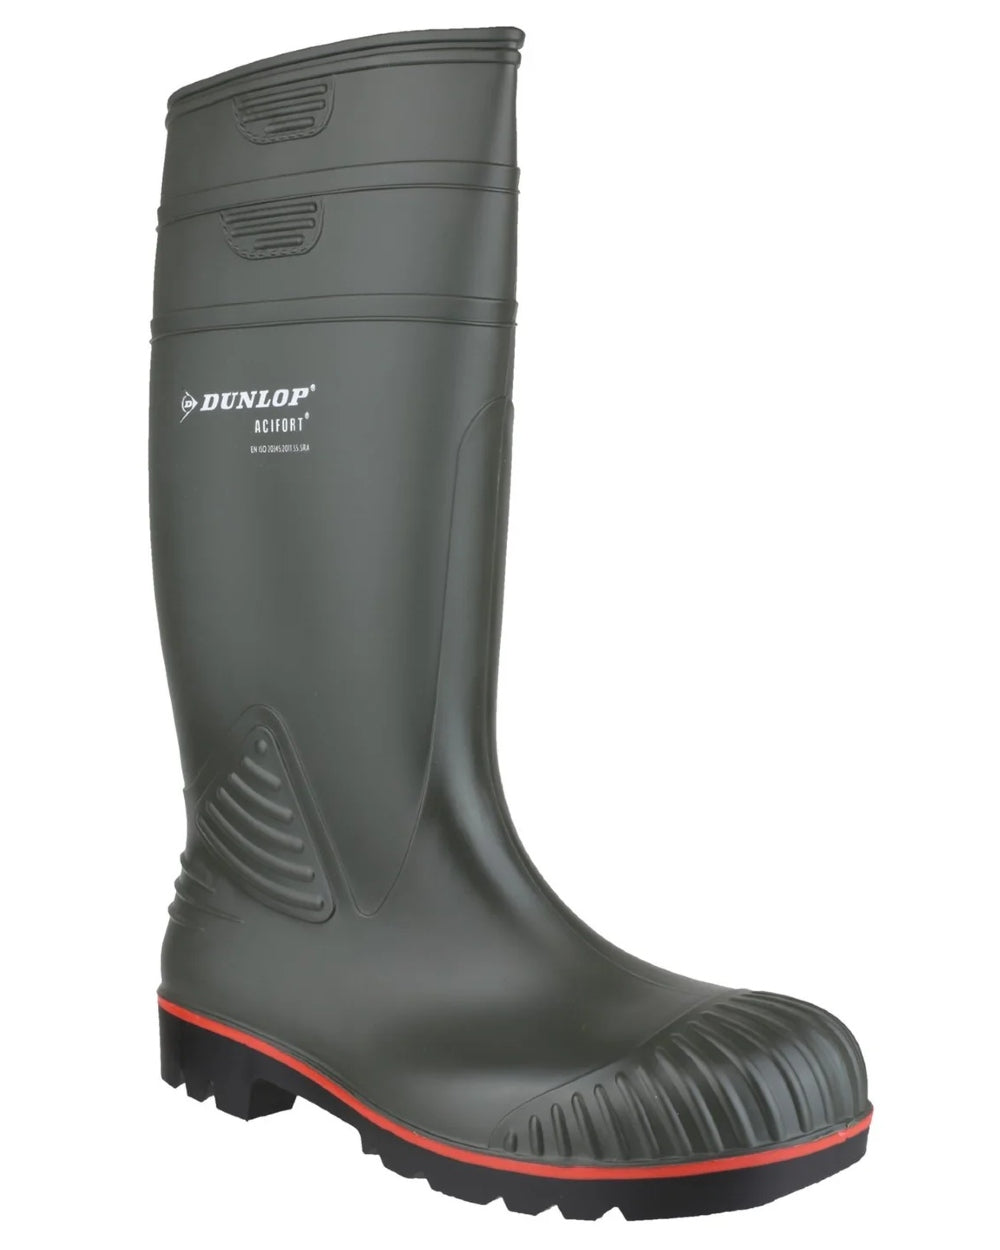 Green coloured Dunlop Acifort Heavy Duty Full Safety Wellingtons on white background 